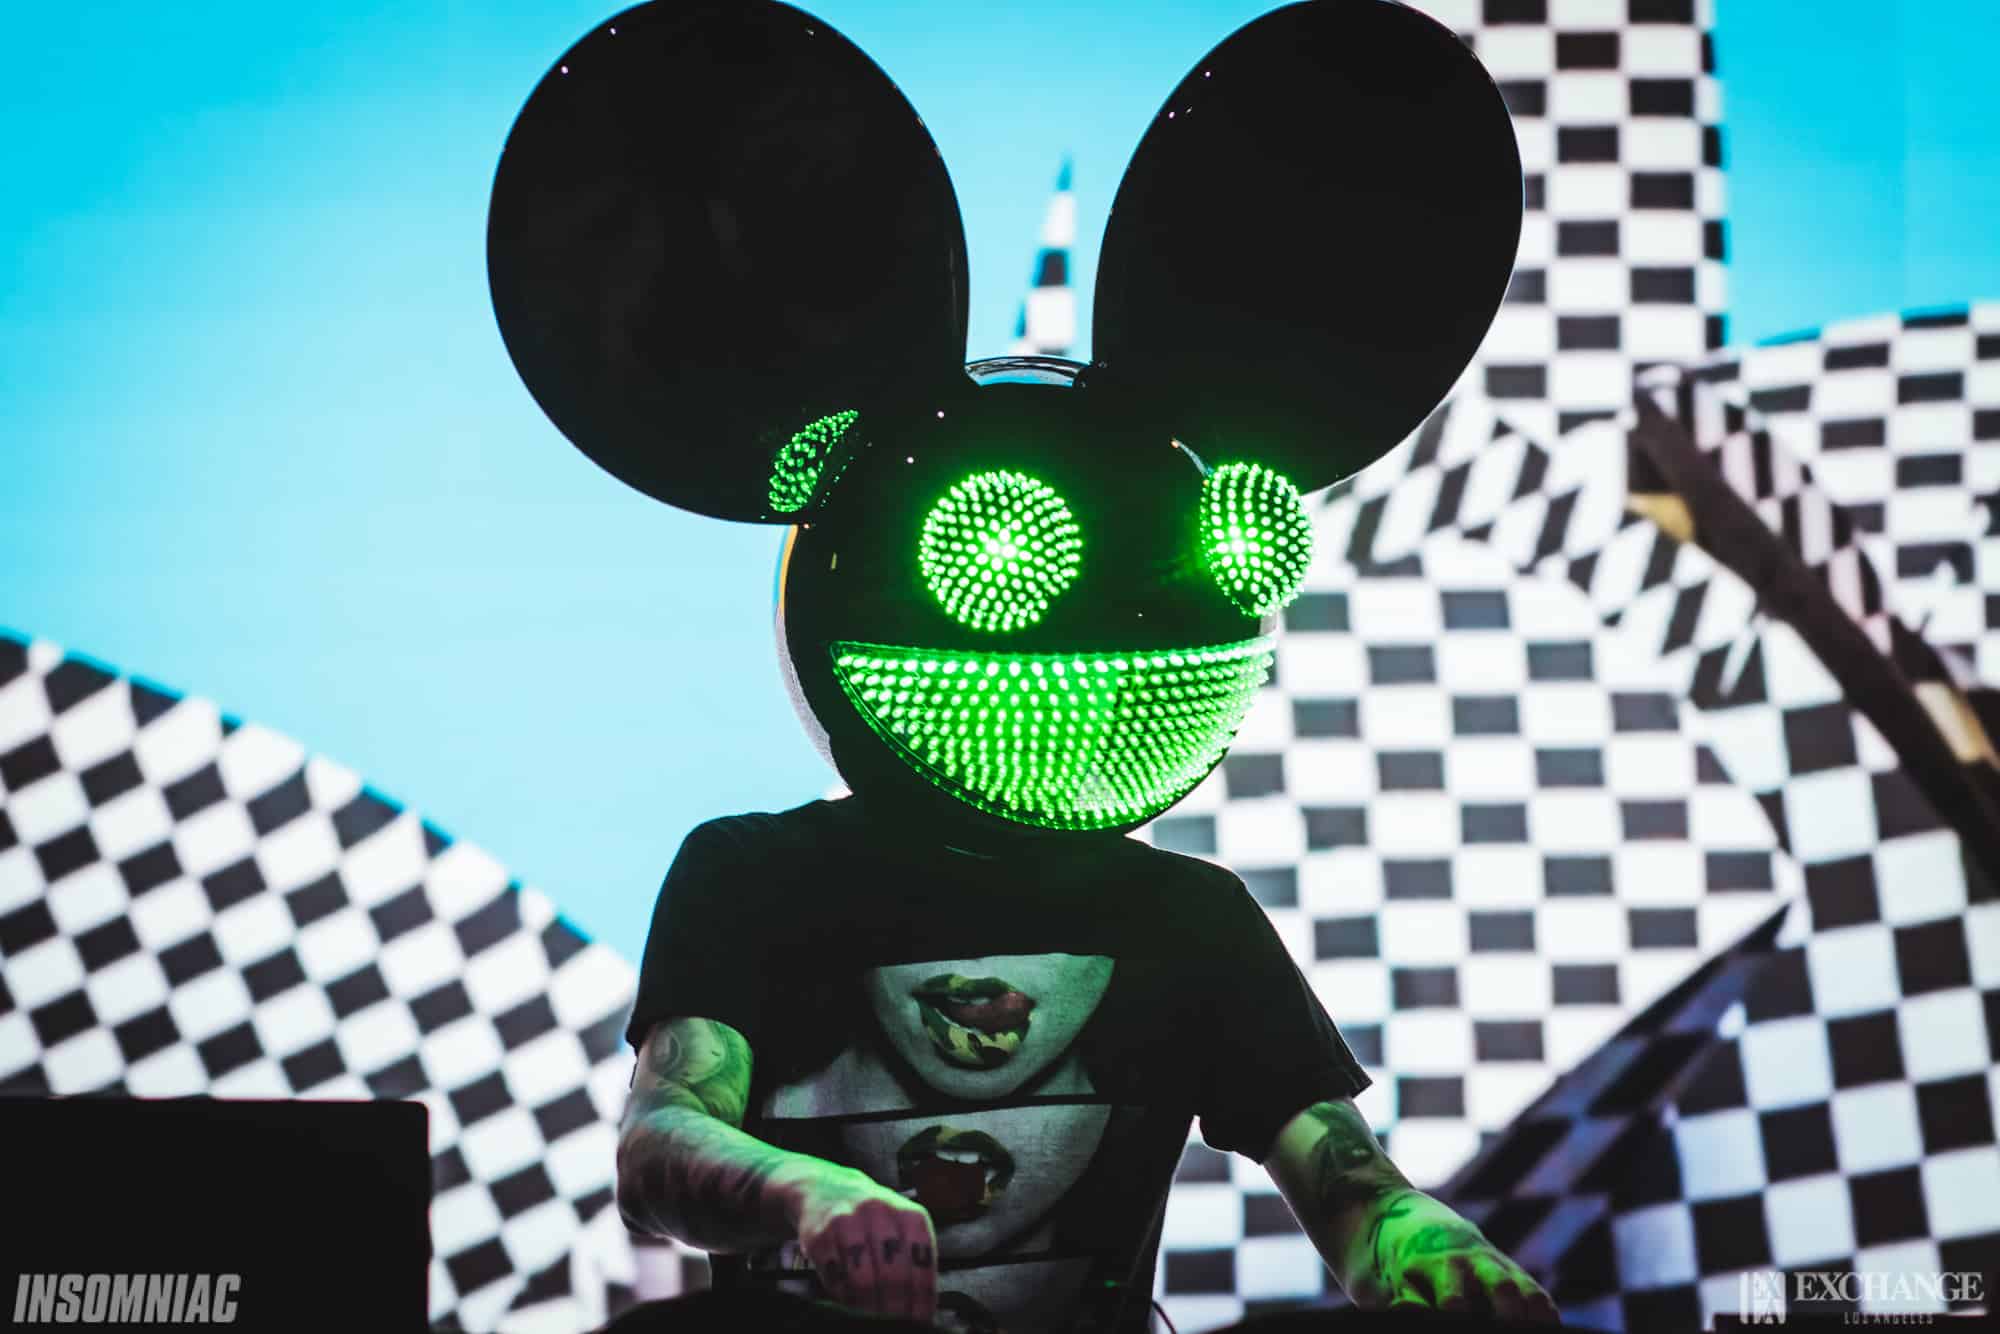 deadmau5 reveals he has produced 9 new tracks in the last 9 days